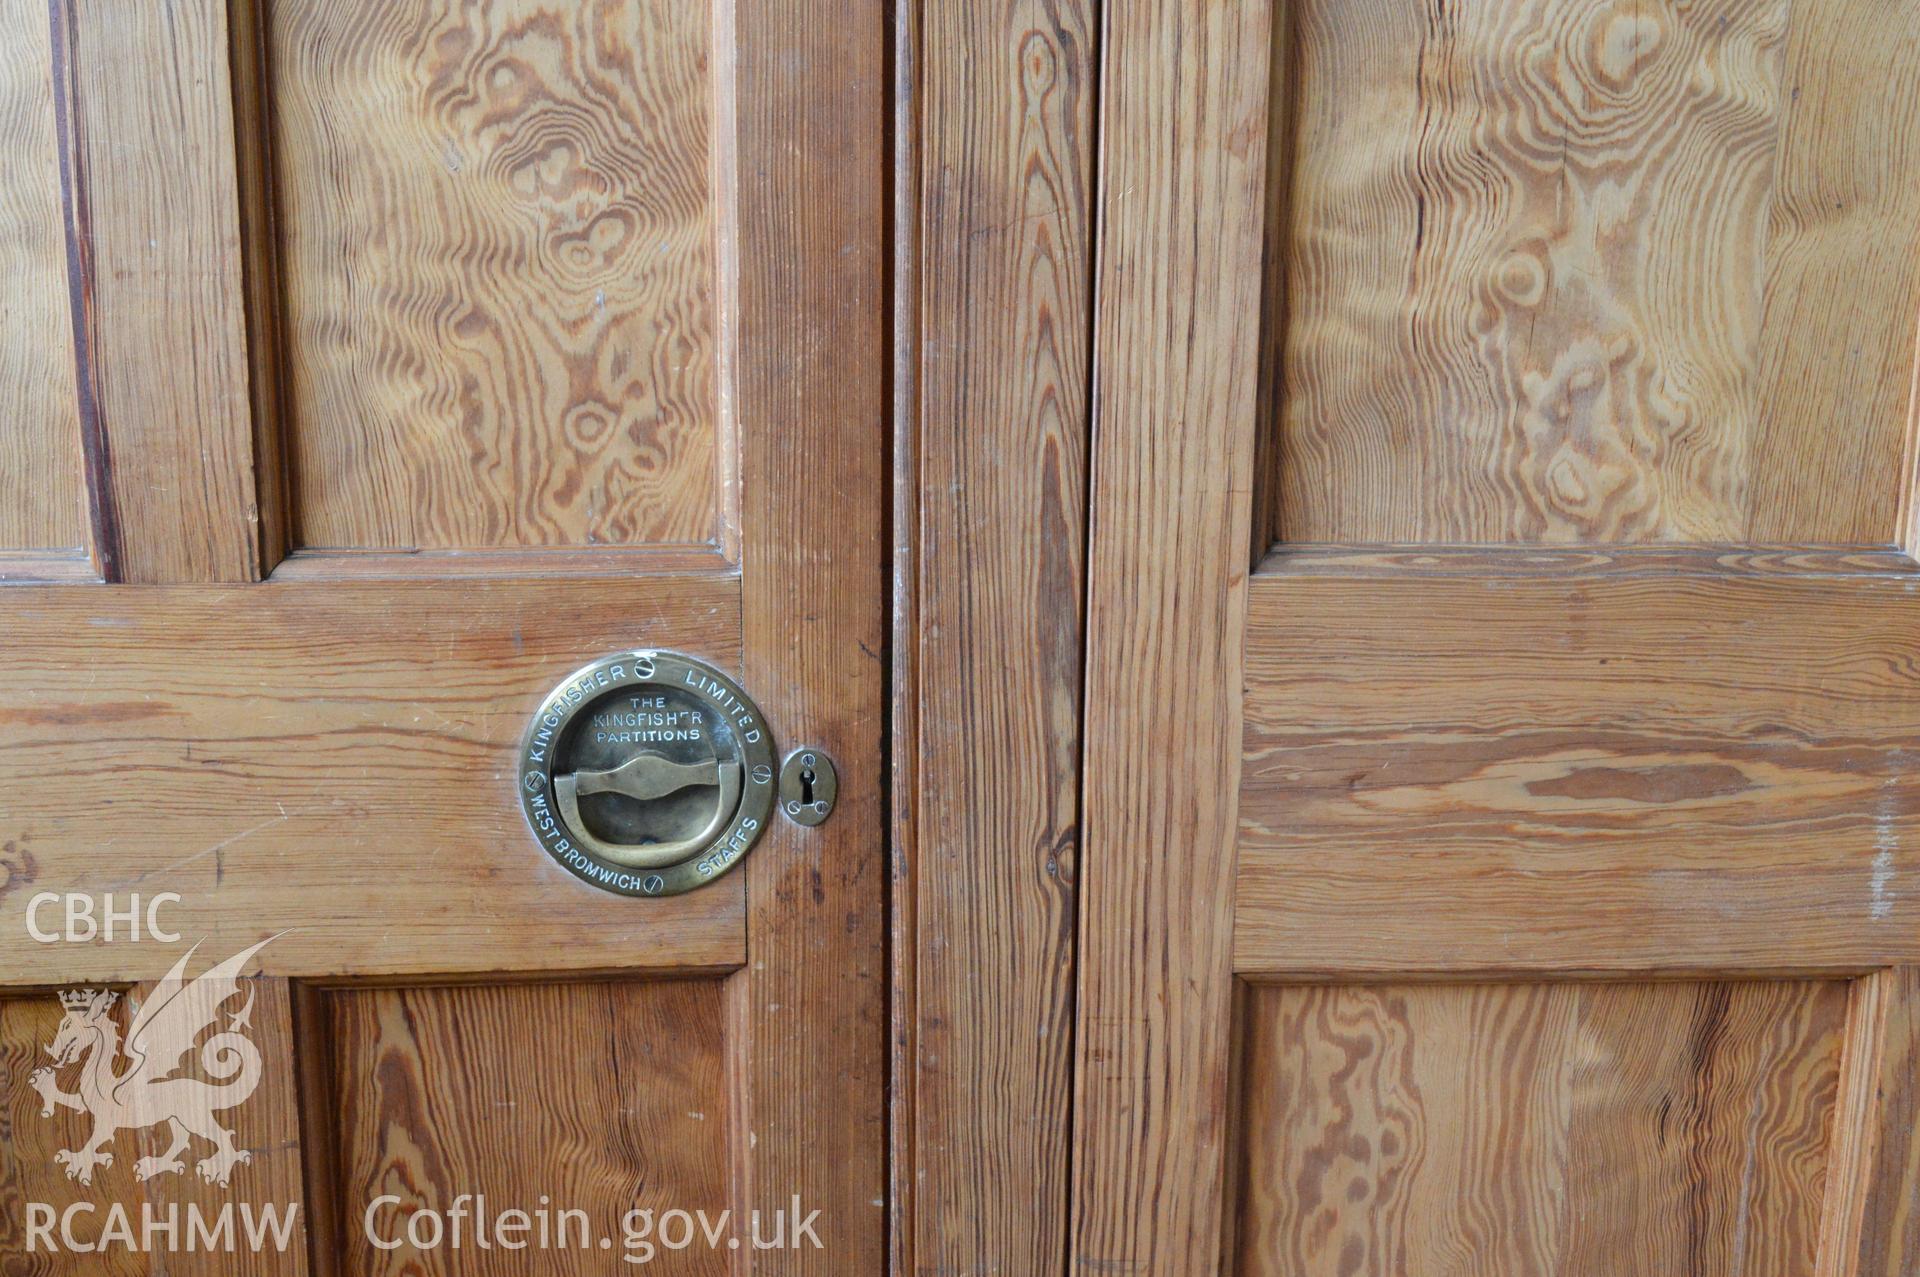 Internal view of detail of wooden partition to main hall, door handles. Digital colour photograph taken during CPAT Project 2396 at the United Reformed Church in Northop. Prepared by Clwyd Powys Archaeological Trust, 2018-2019.